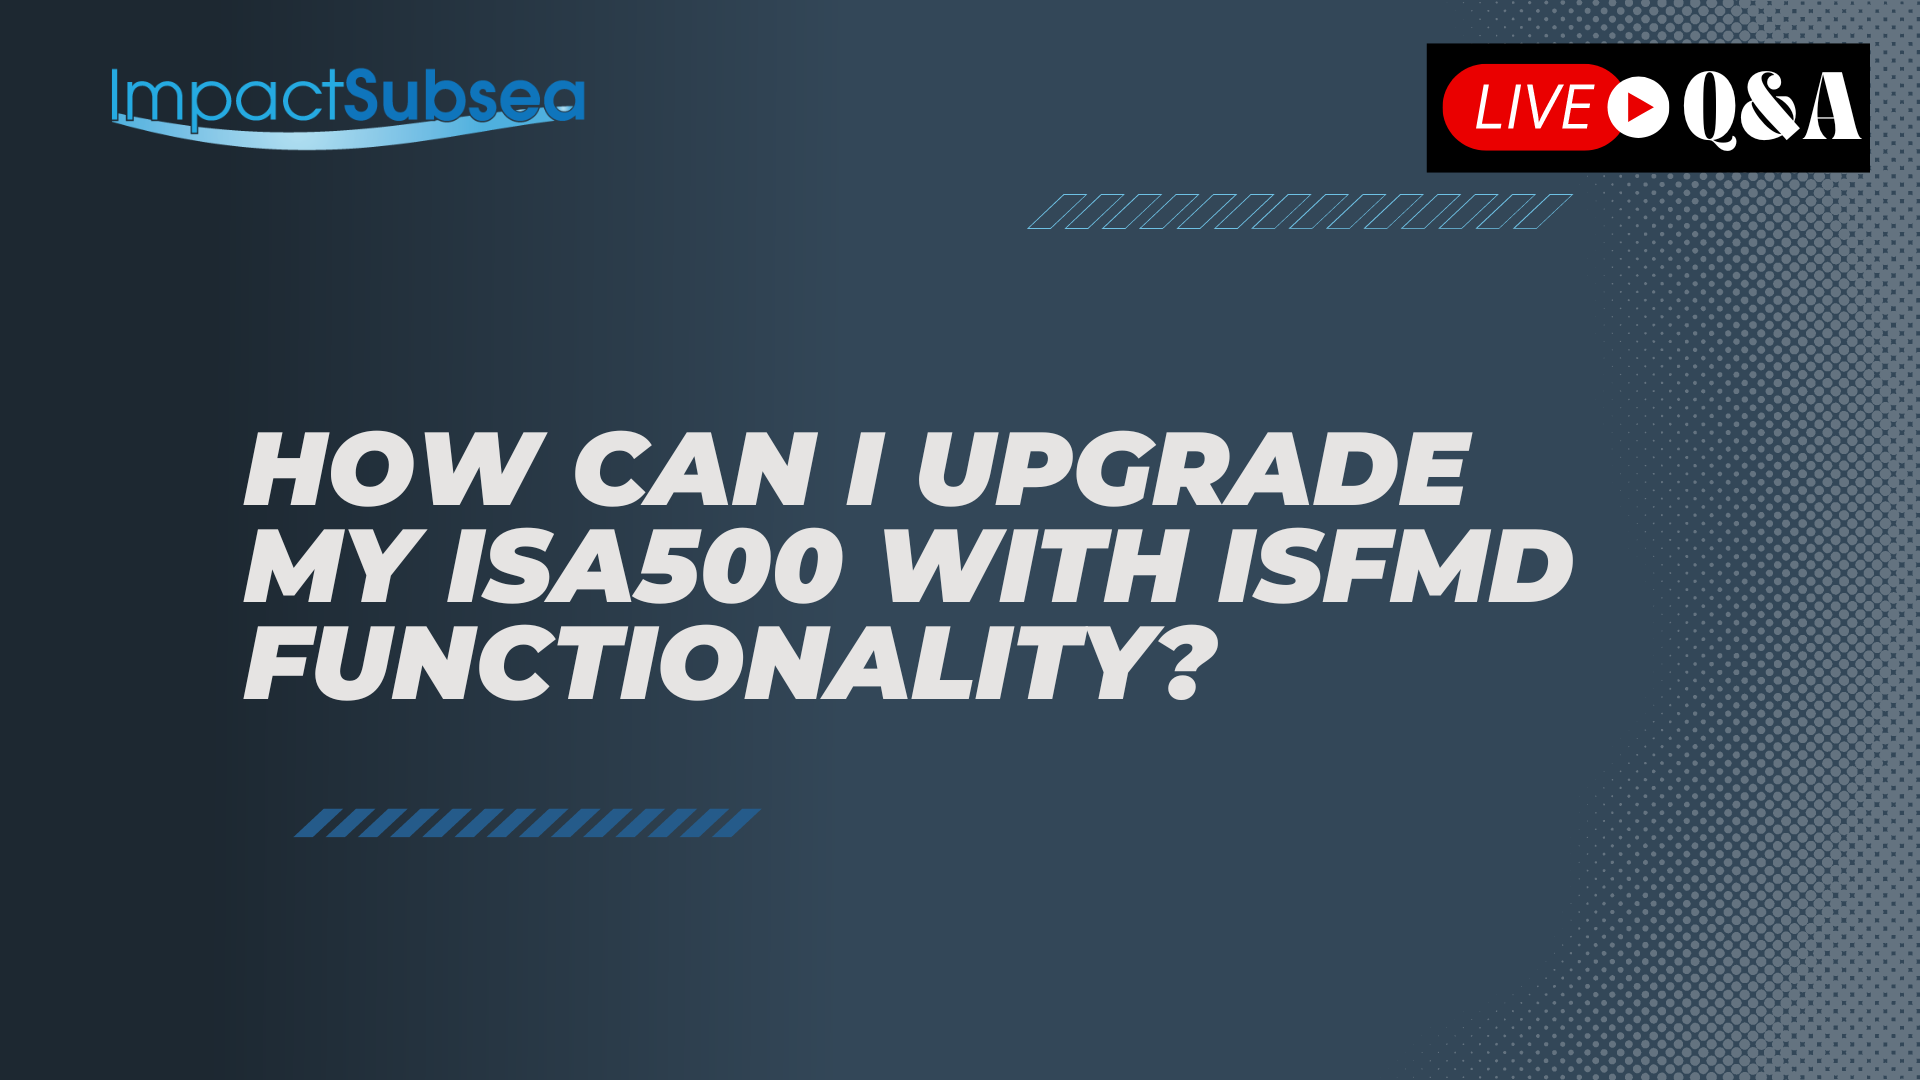 How can I upgrade my ISA500 with ISFMD functionality?